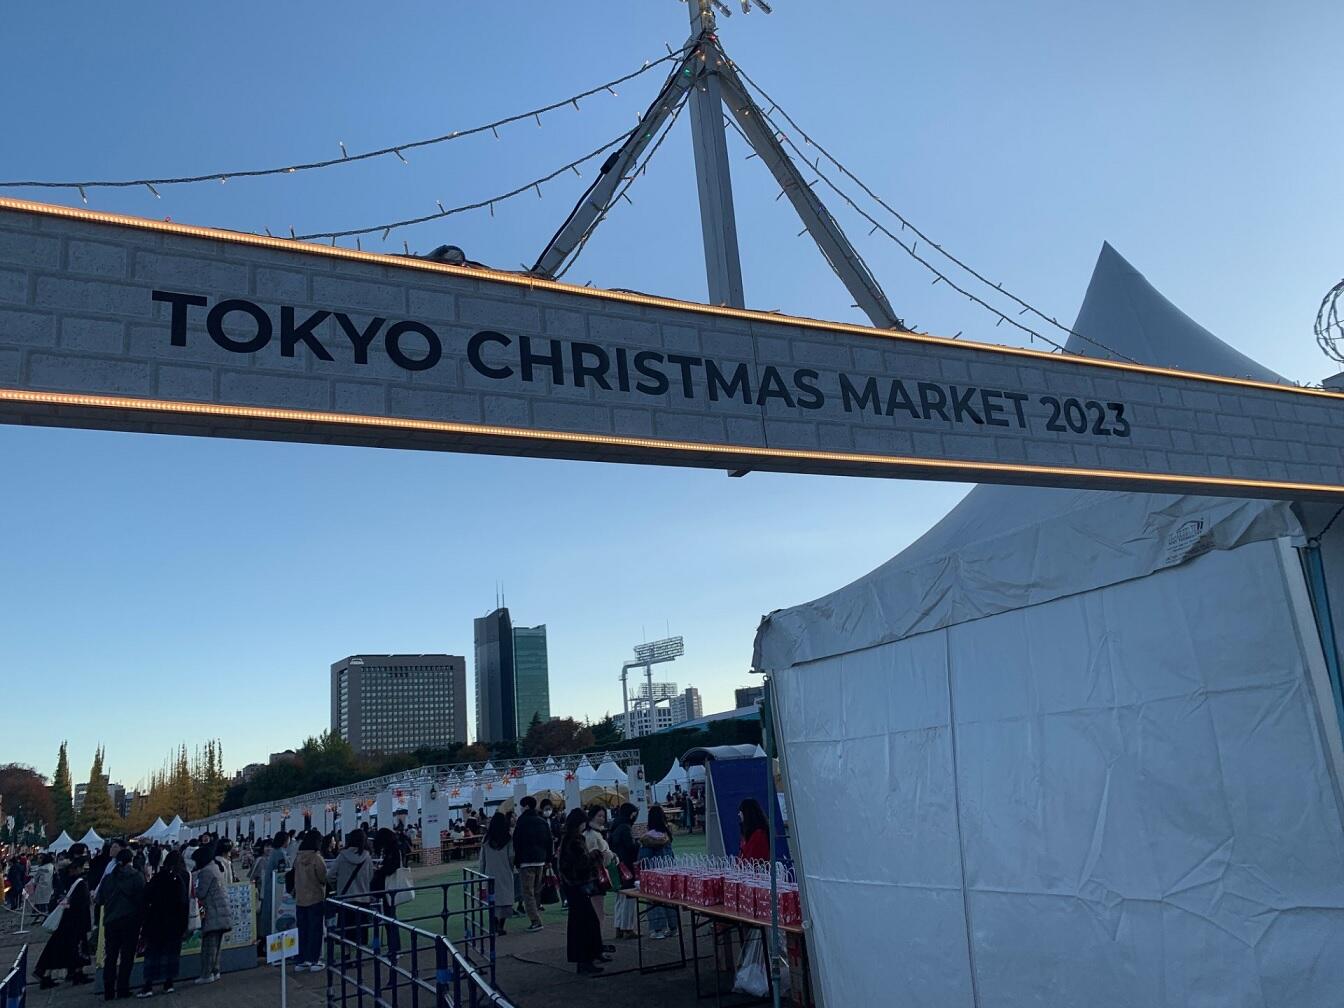 There were supposed to be 5 types of sausages…but there were only 5 sausages of each type. Complaints were made to the Tokyo Christmas Market store, and the person in charge explained, “It’s a lack of management on my part.”